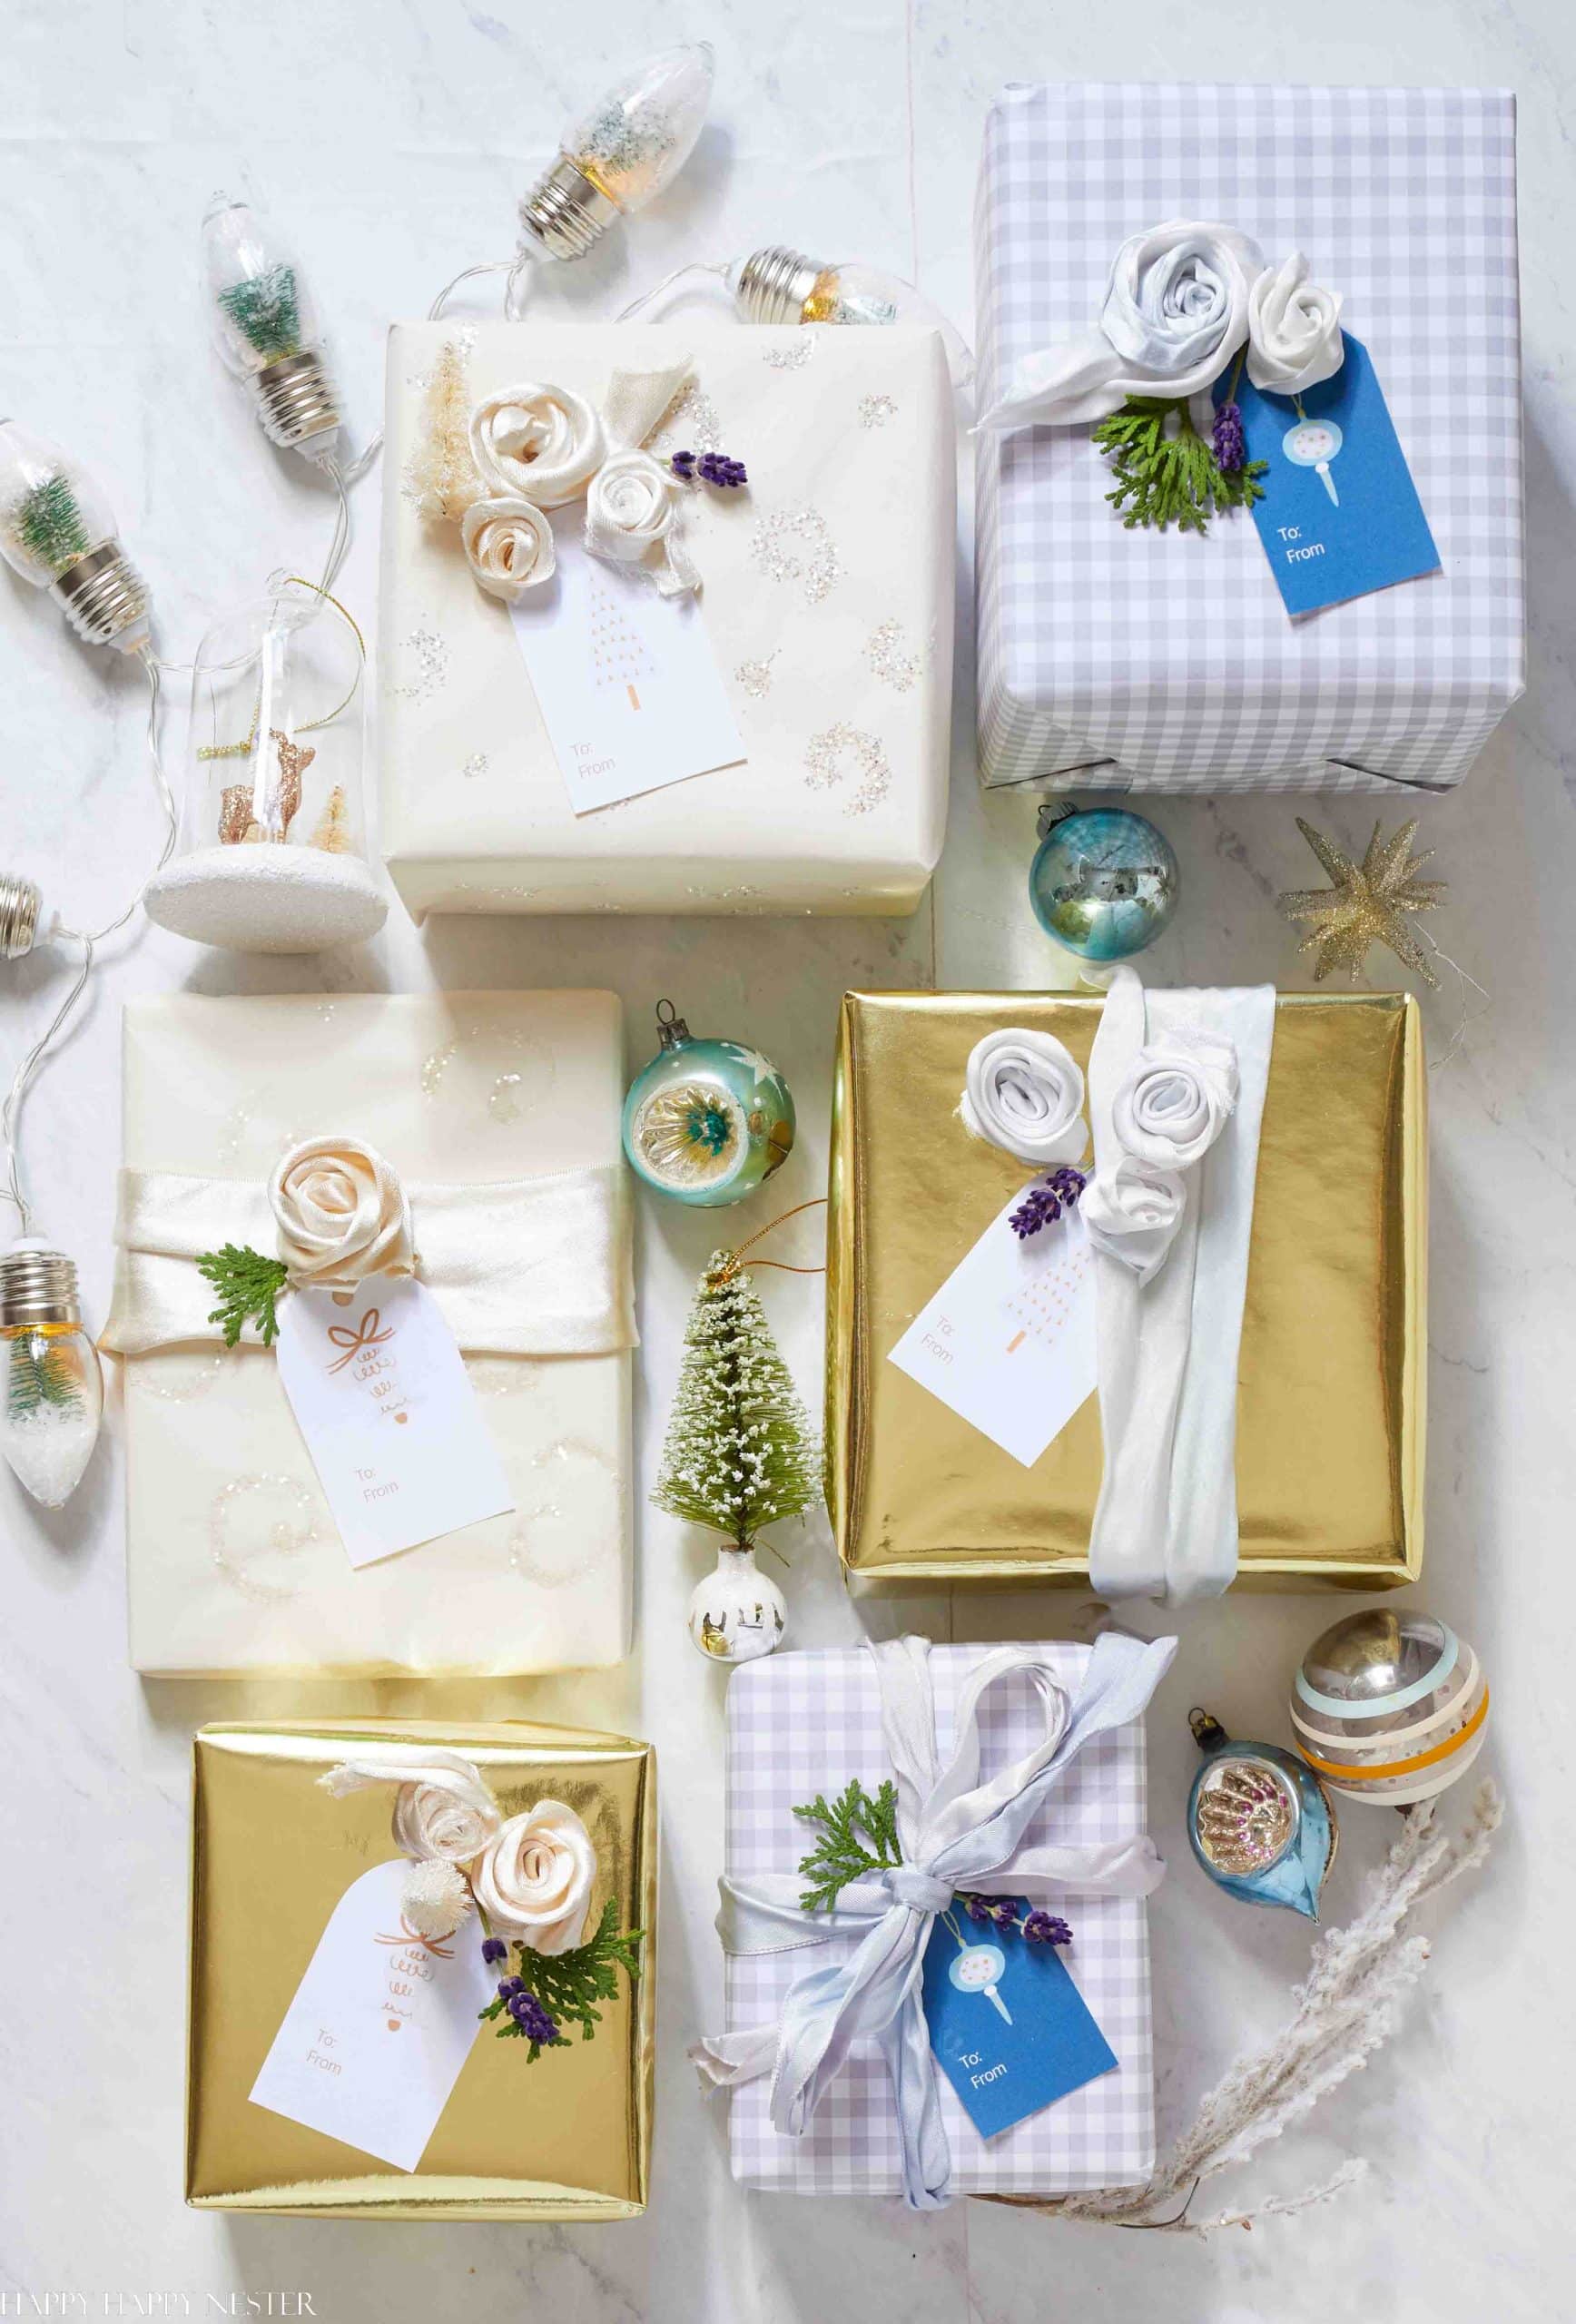 Small wrapped gifts with printable gift tags